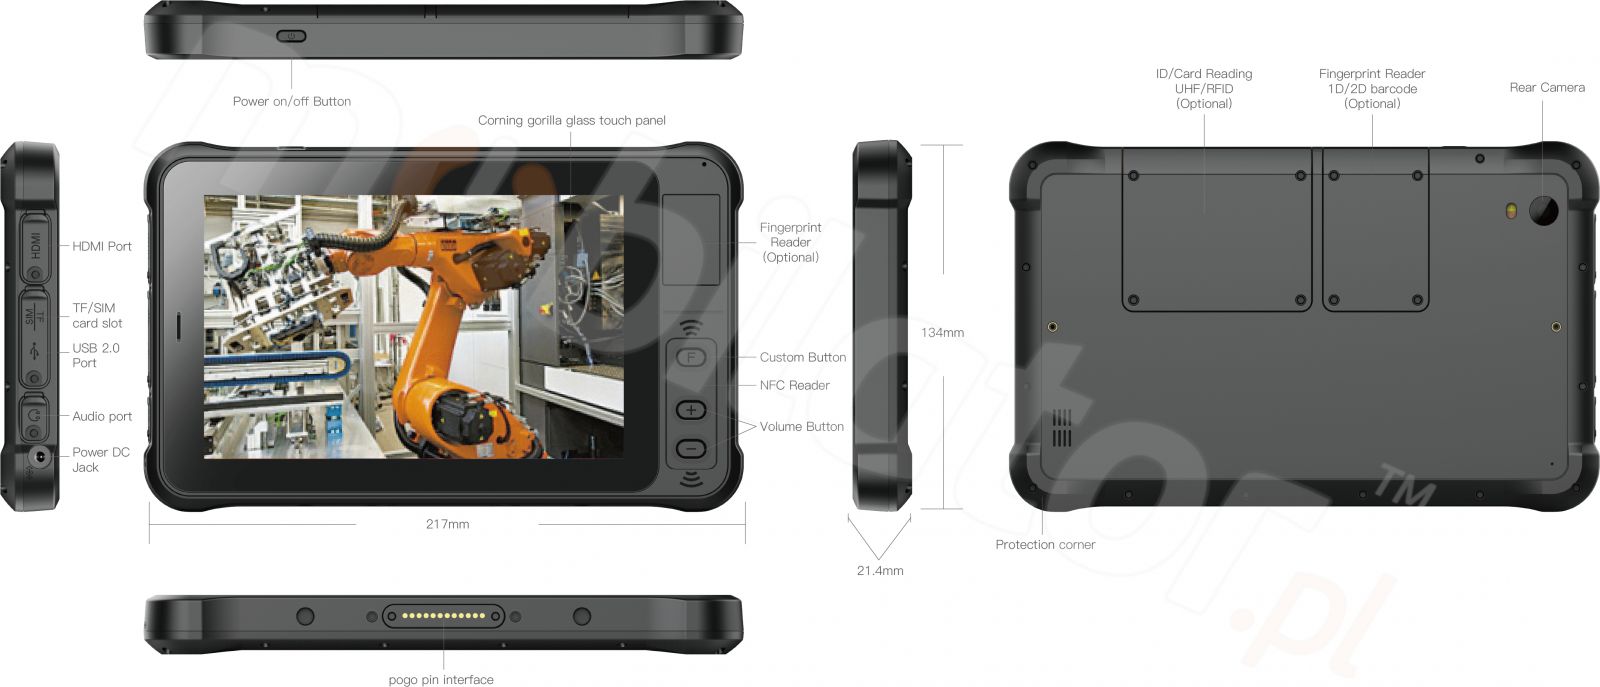 Rugged tablet with a 7 inch IPS screen, Android 10.0 GMS, 4GB RAM, 64GB disk, NFC, 1D code scanner - Emdoor Q75 v.2 